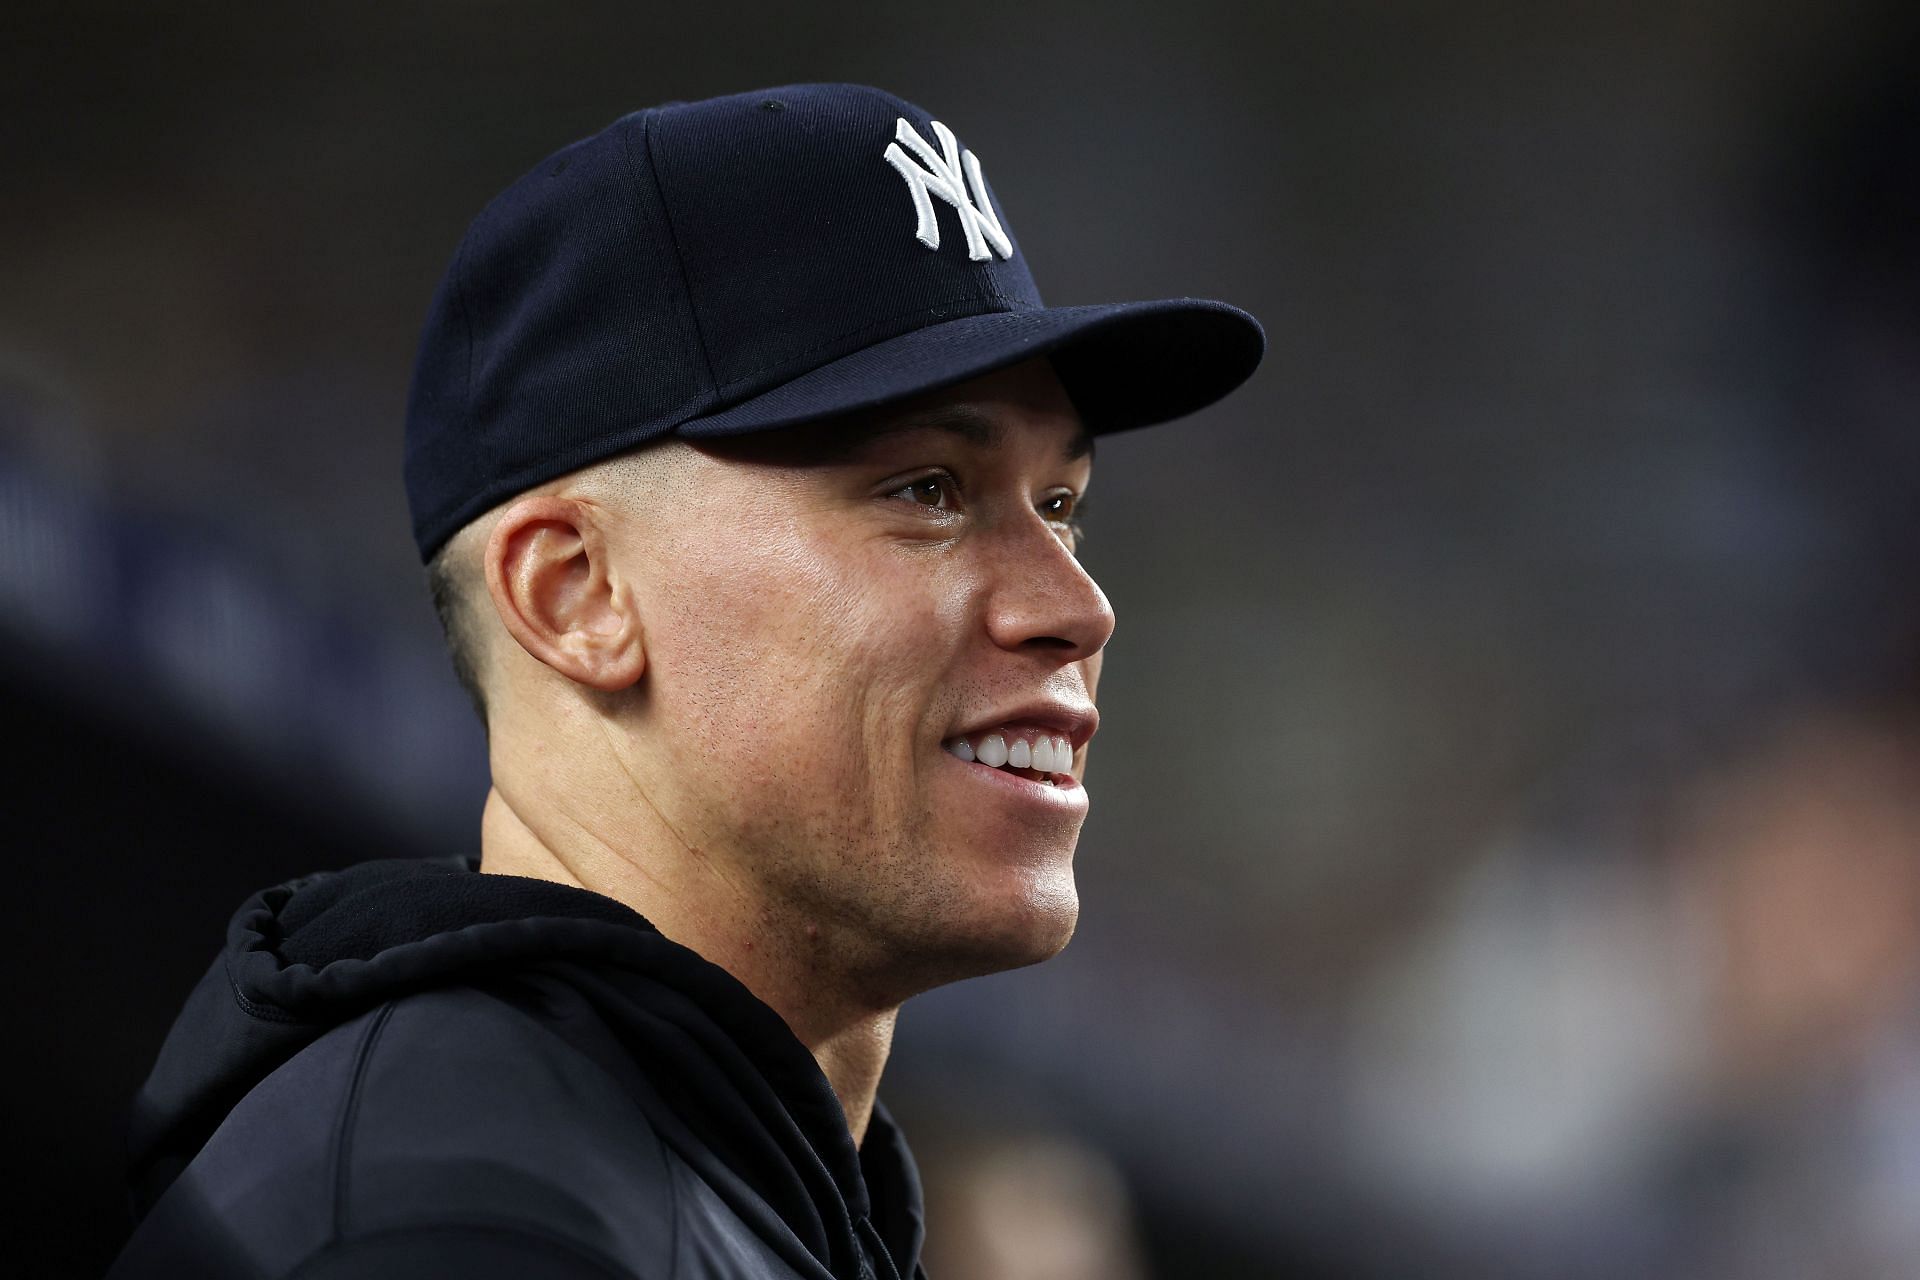 Aaron Judge may be biggest key for Yankees in 2017 – New York Daily News